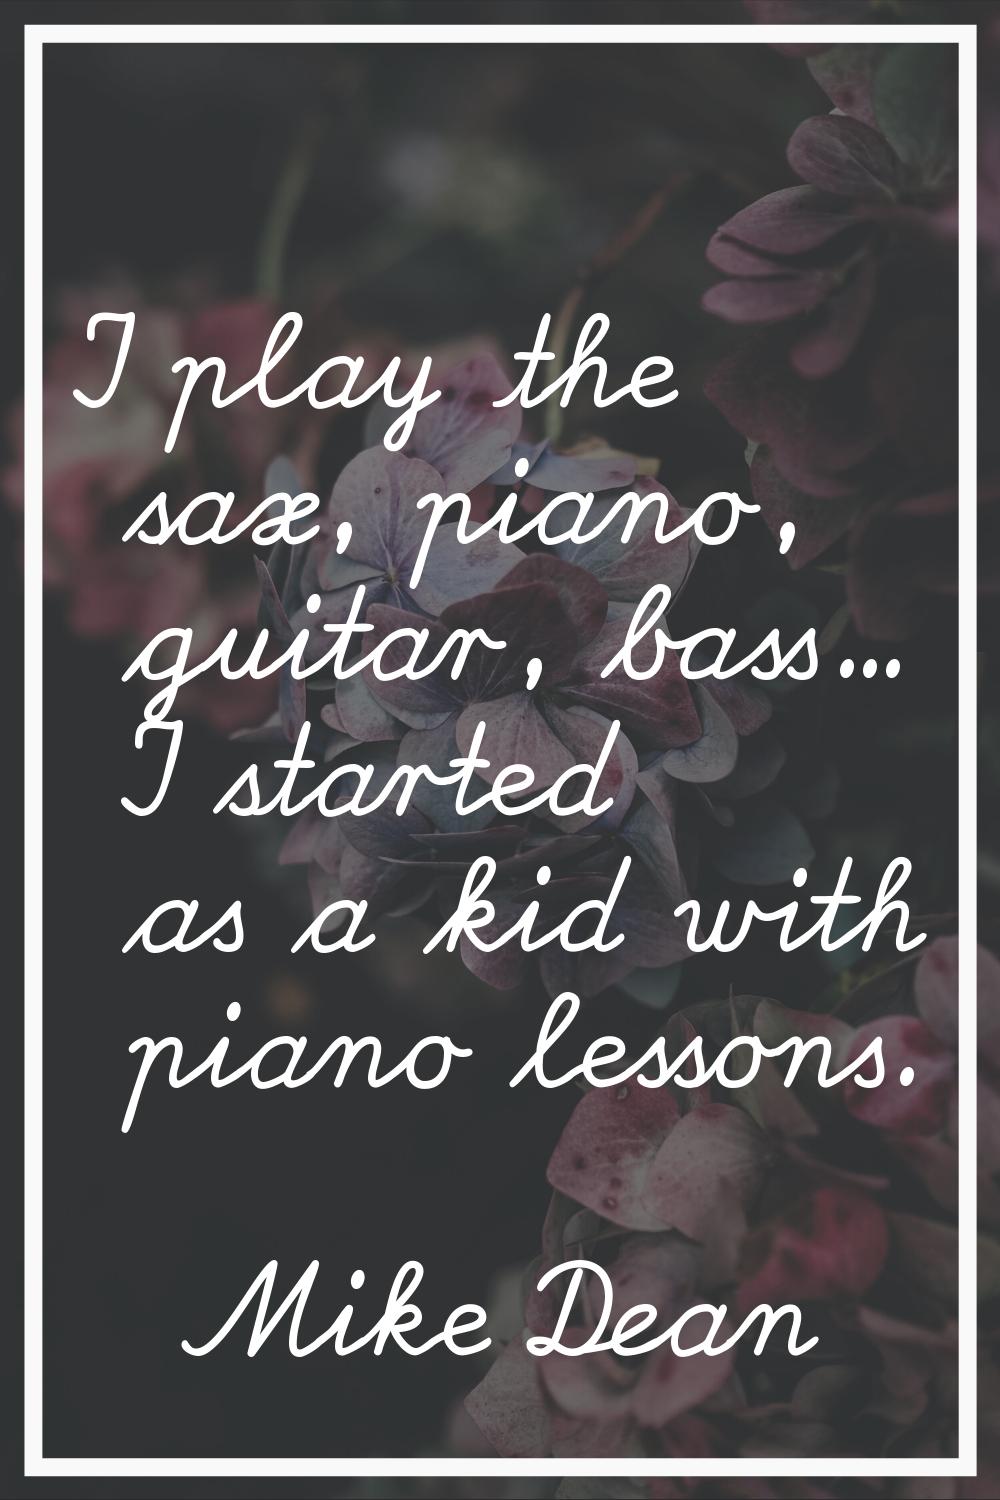 I play the sax, piano, guitar, bass... I started as a kid with piano lessons.